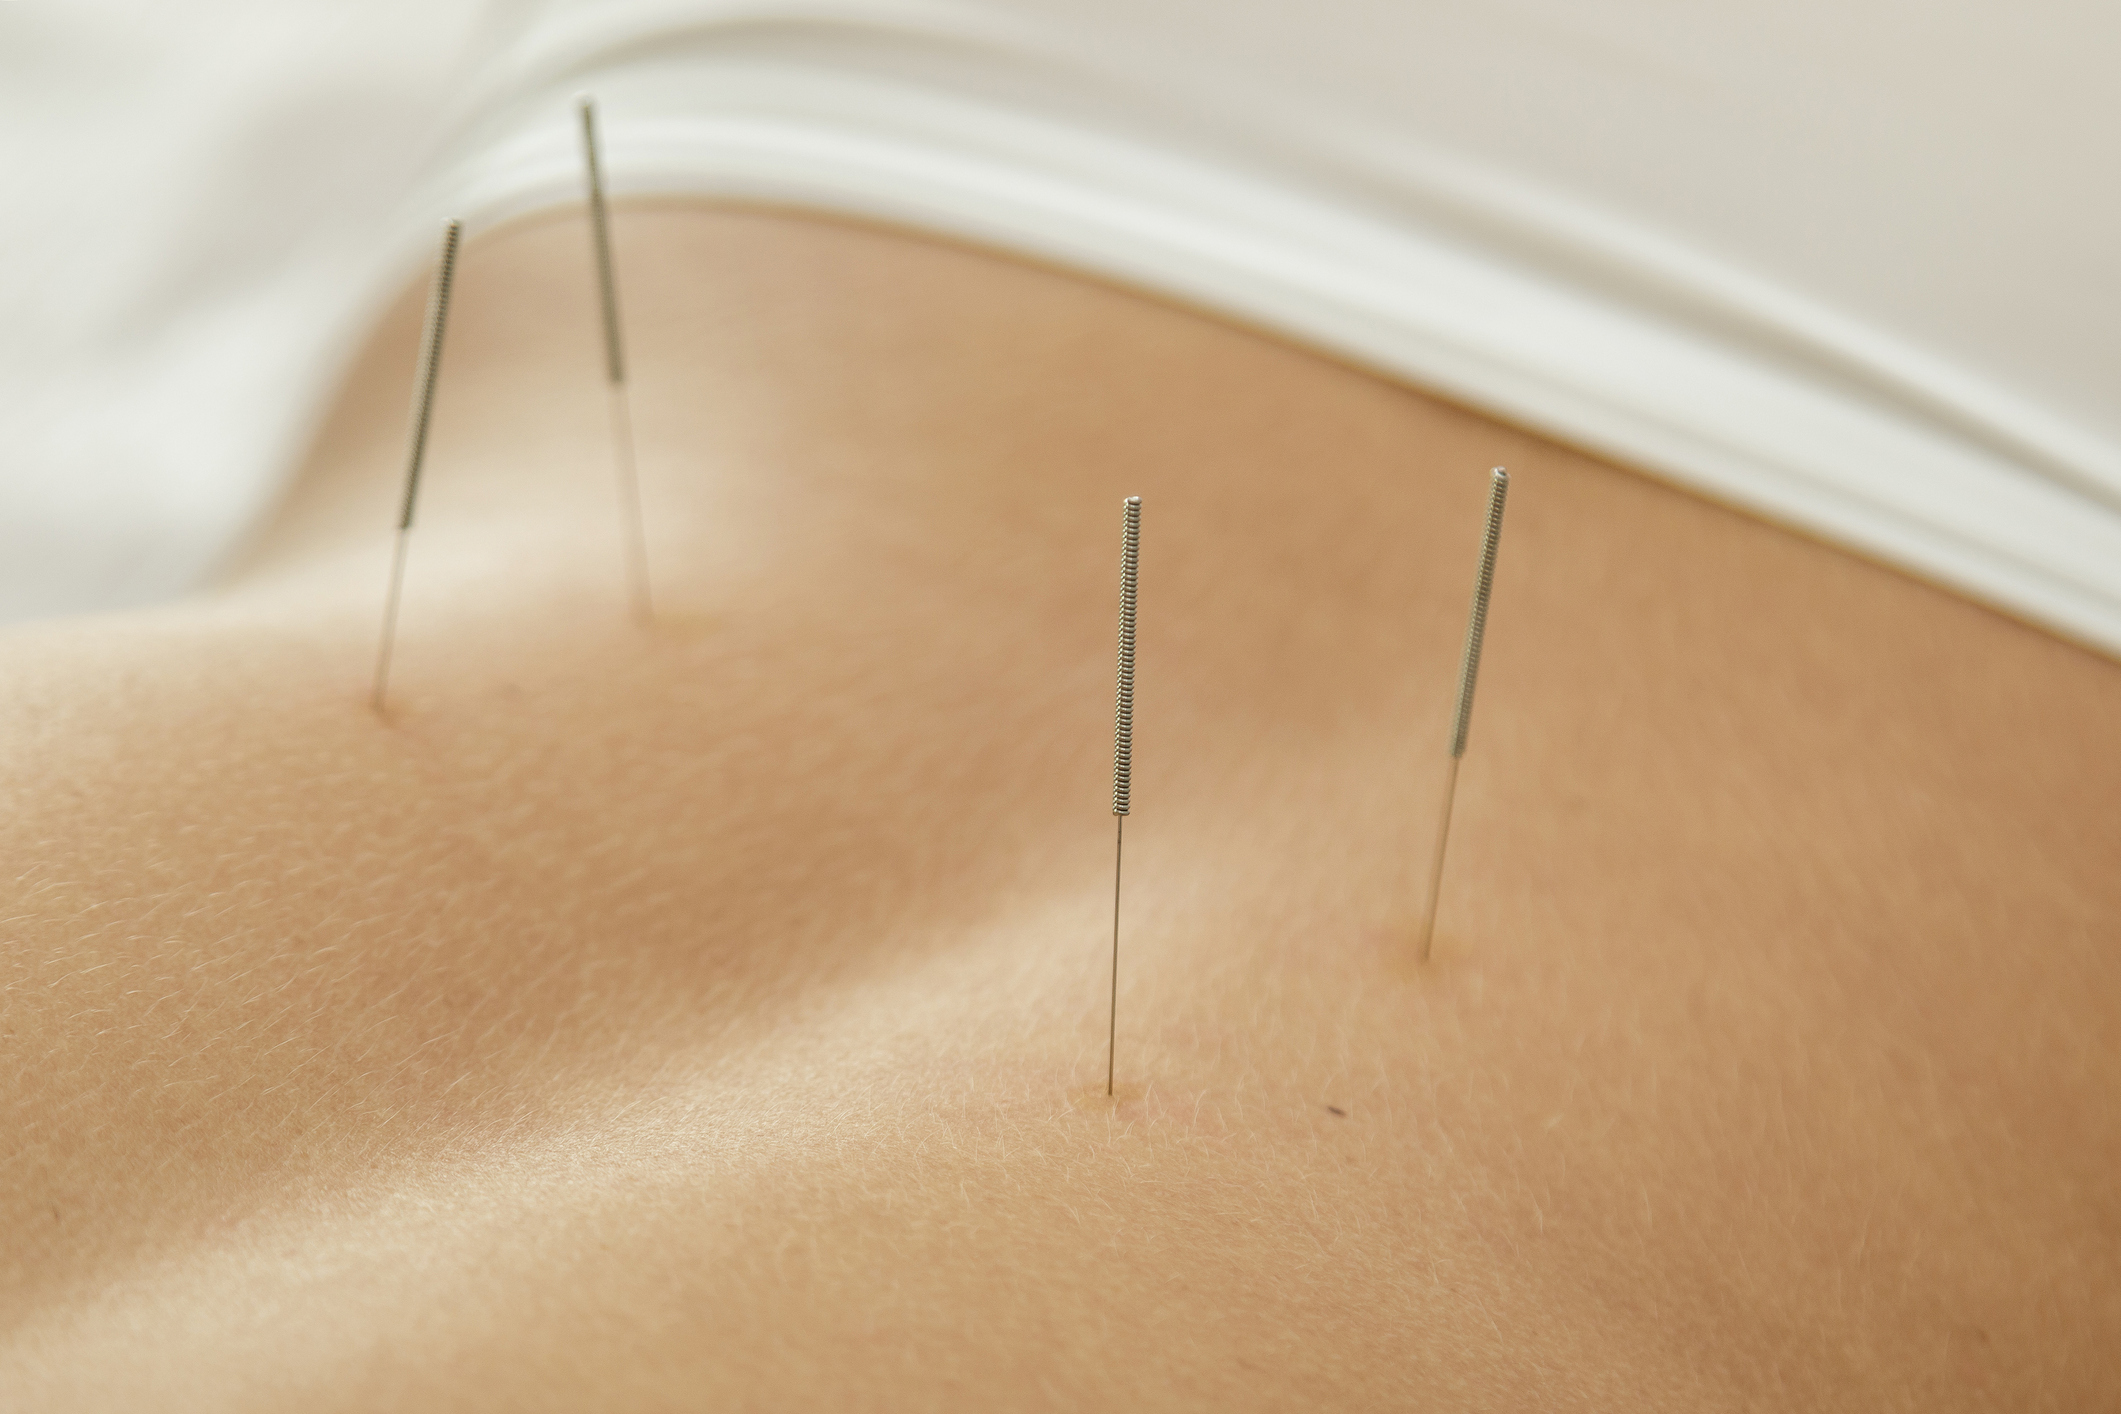 Back acupuncture